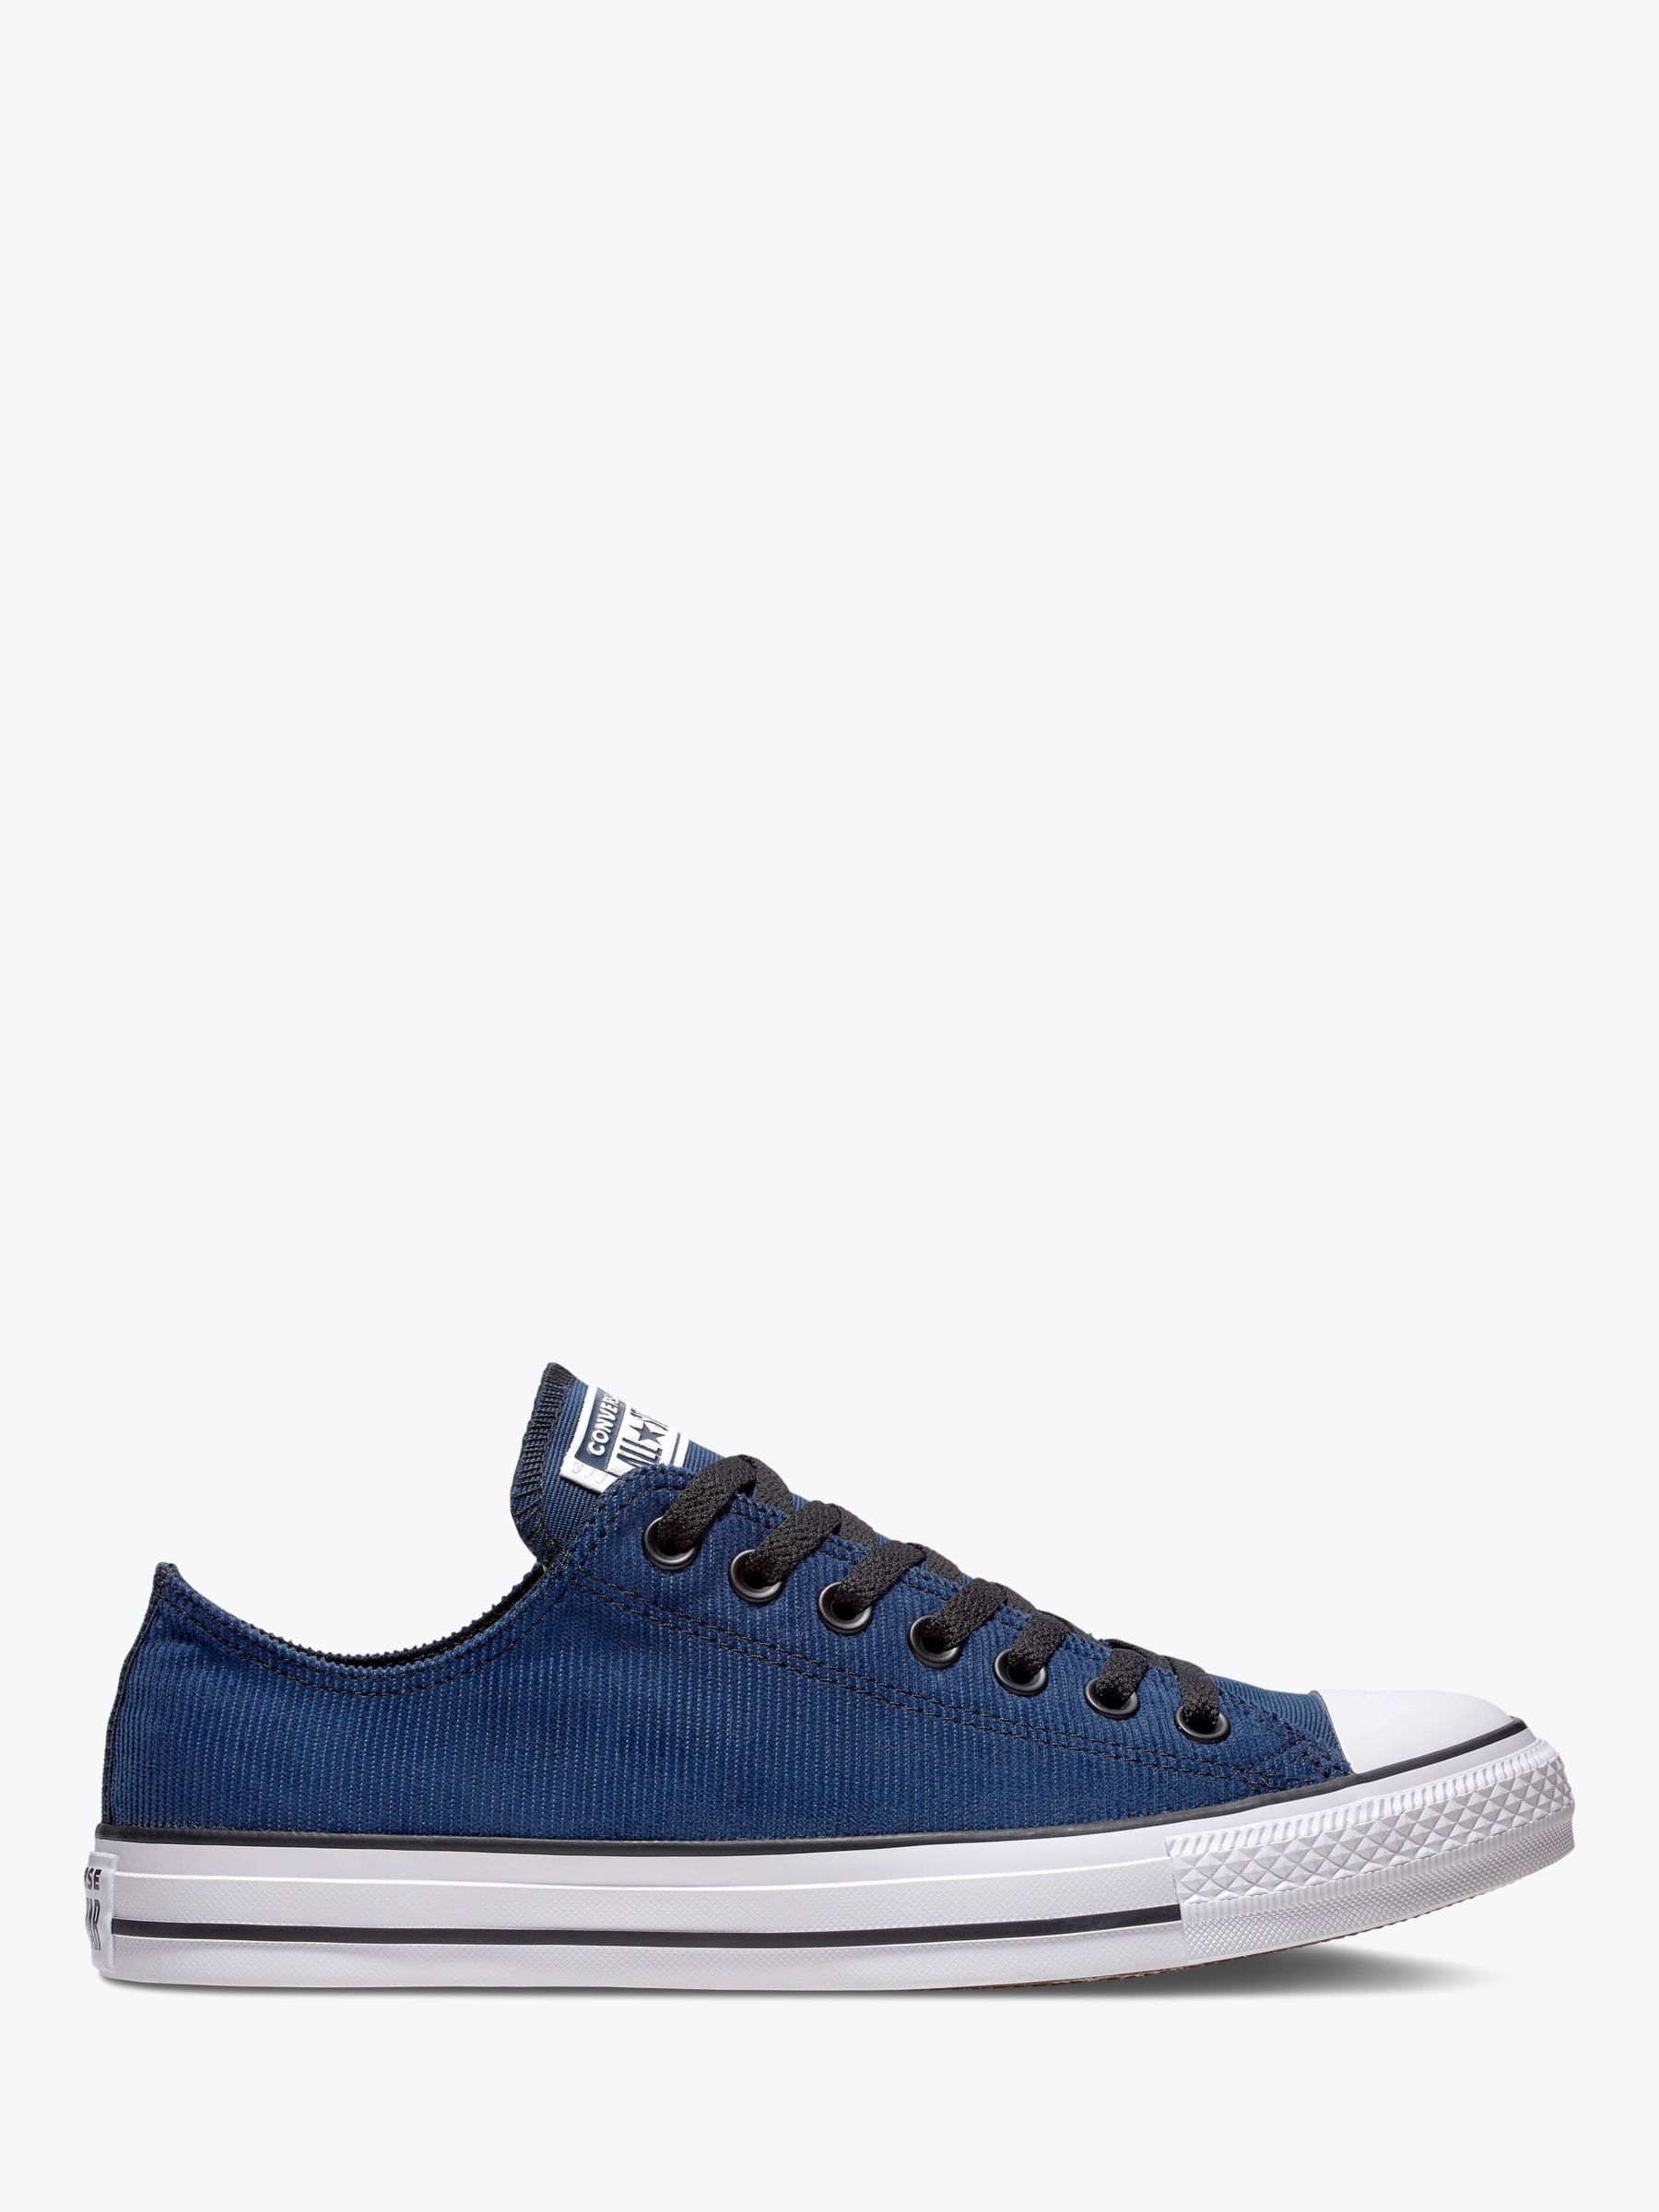 converse navy all star ox trainers